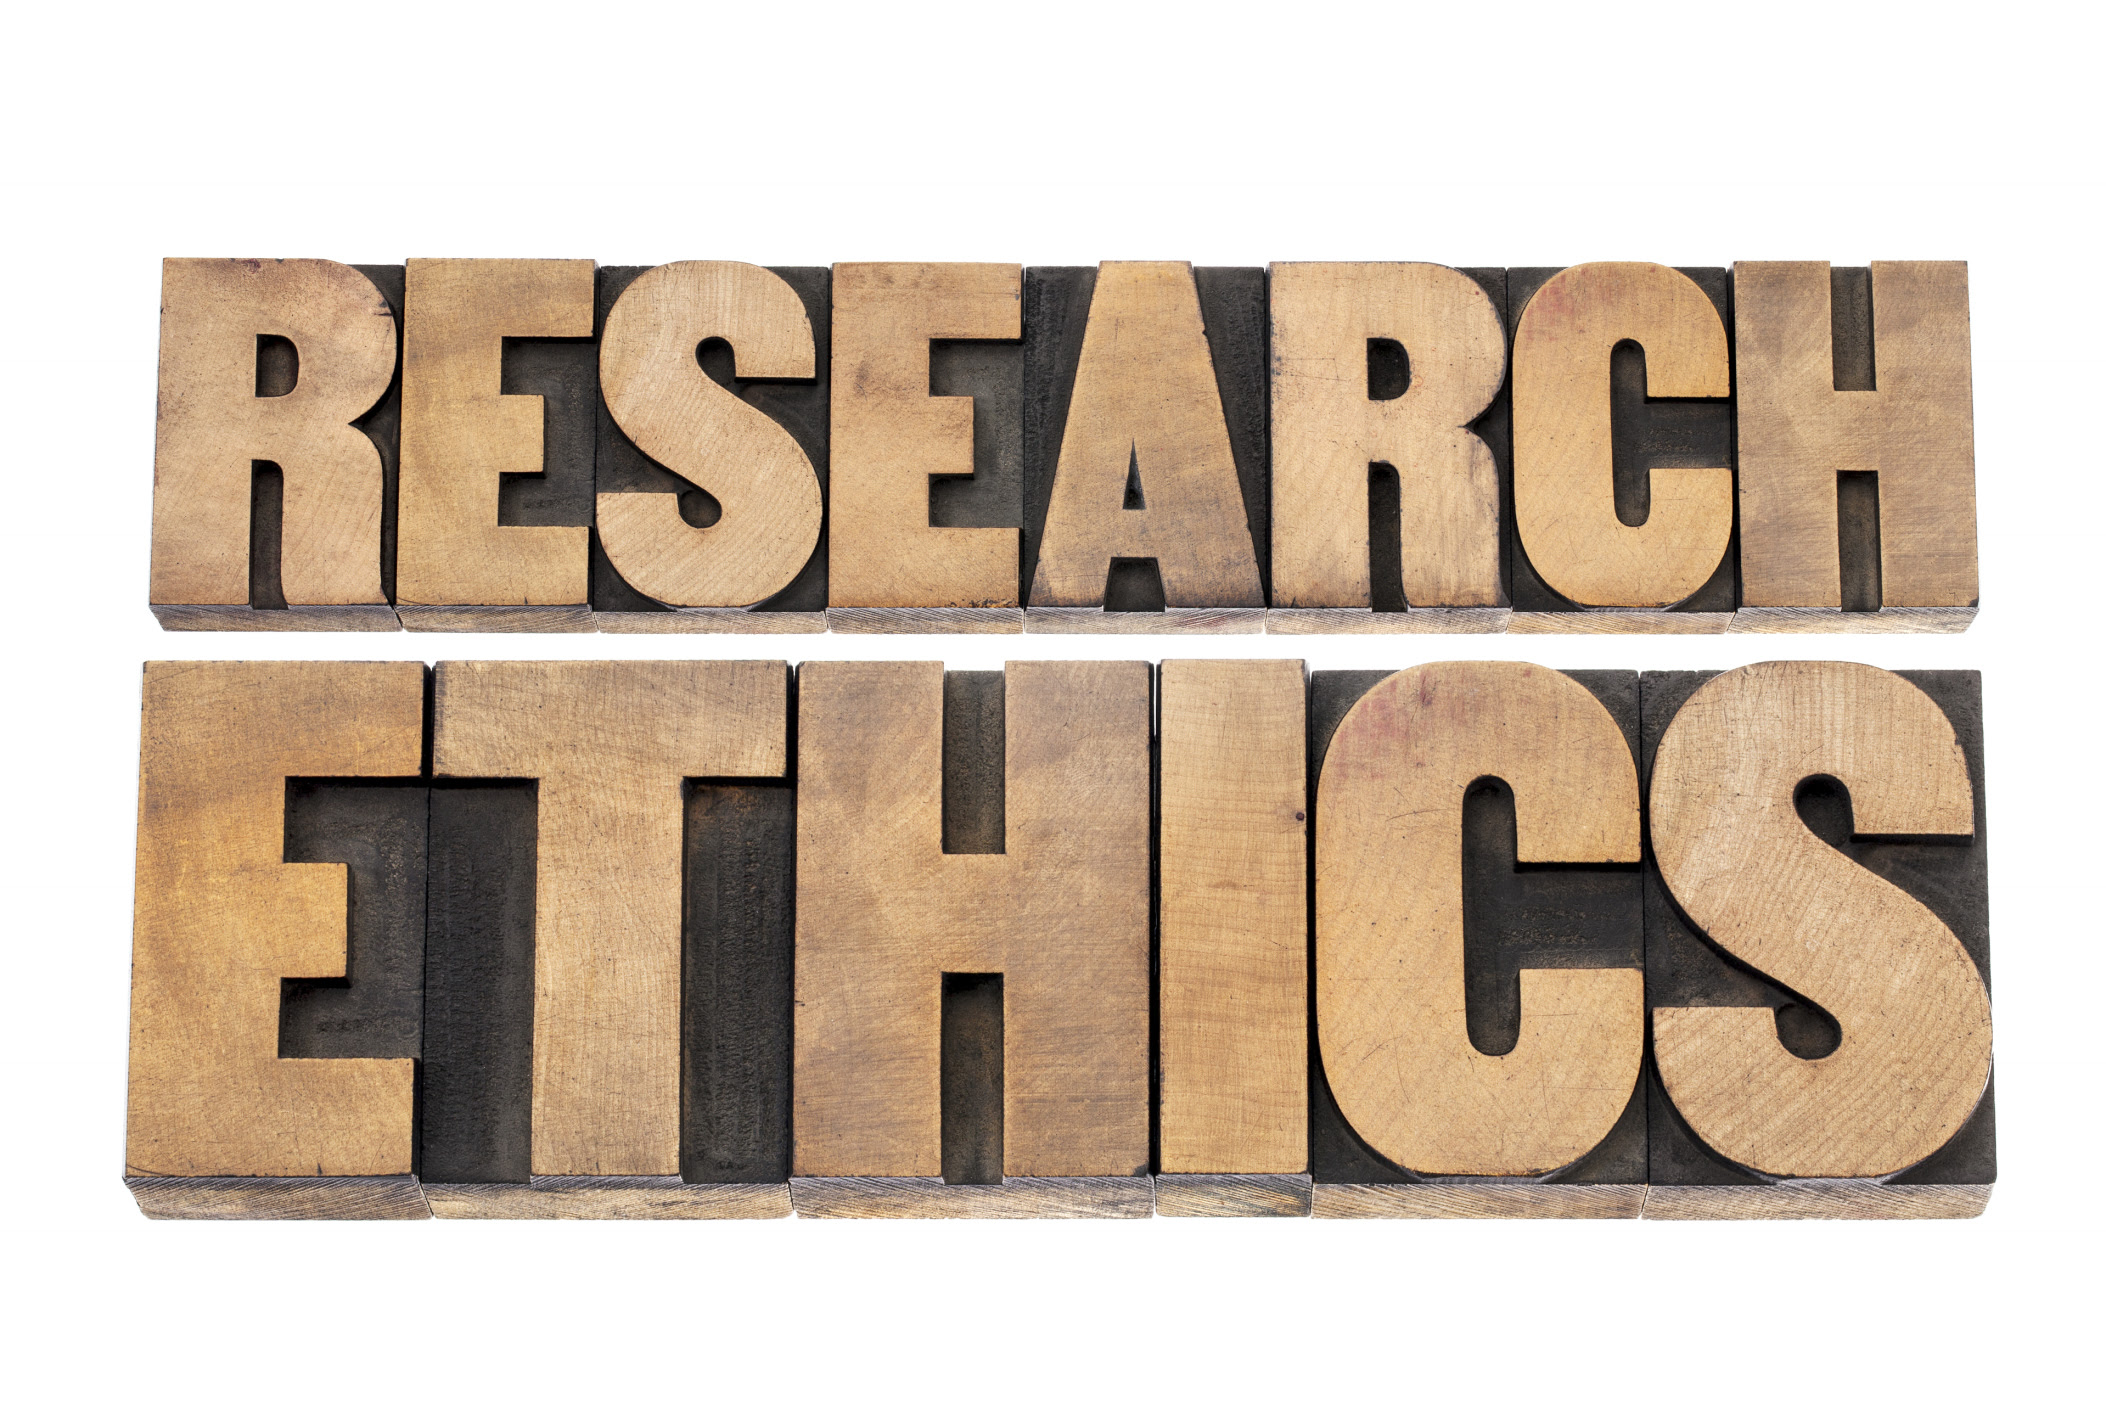 Ethics of research not so black and white